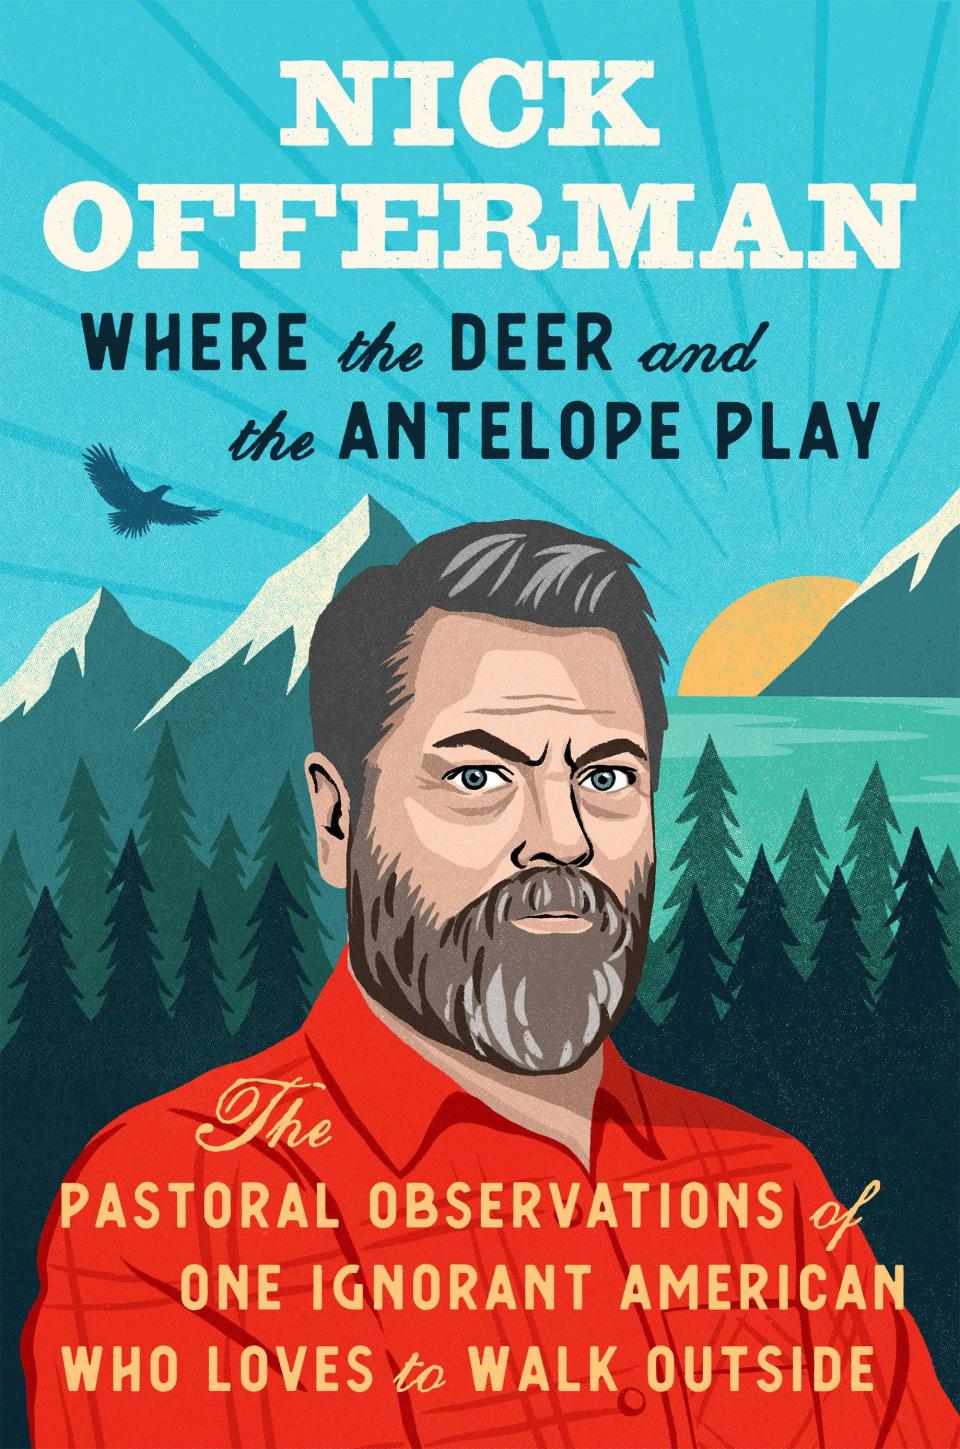 "Where the Deer and the Antelope Play: The Pastoral Observations of One Ignorant American Who Loves to Walk Outside" by Nick Offerman.